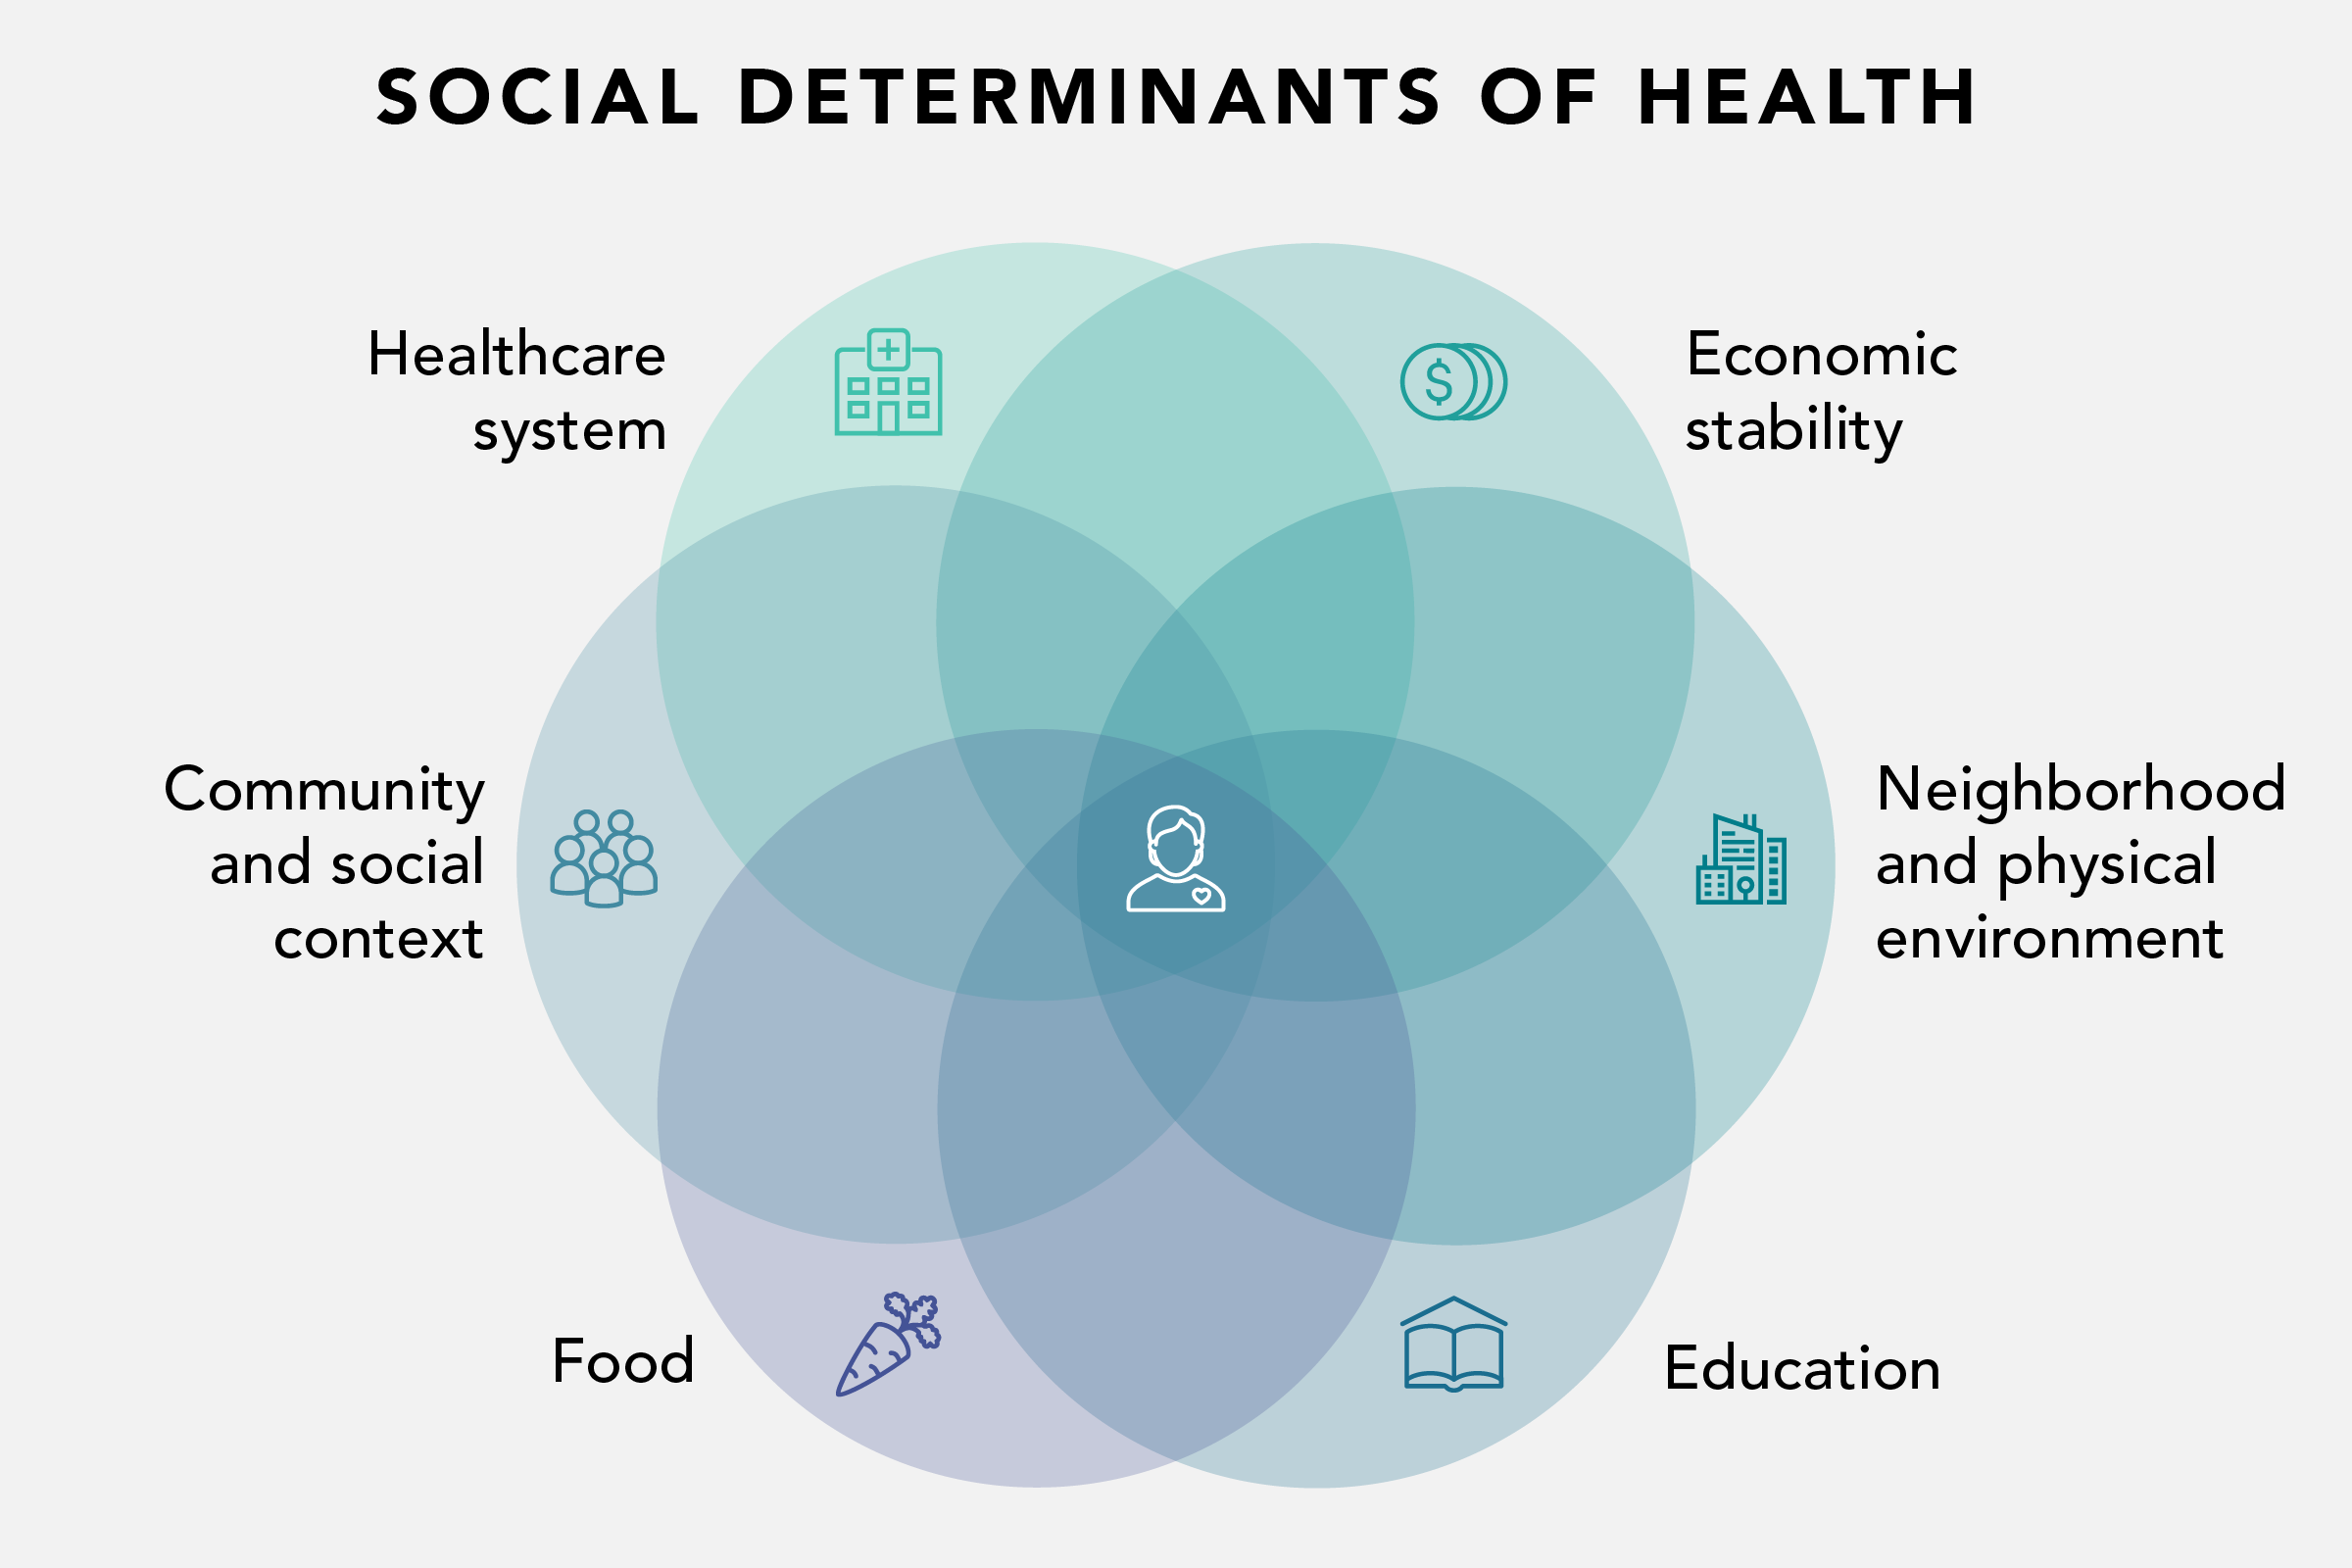 Uncovering social determinants of health in your EHR data